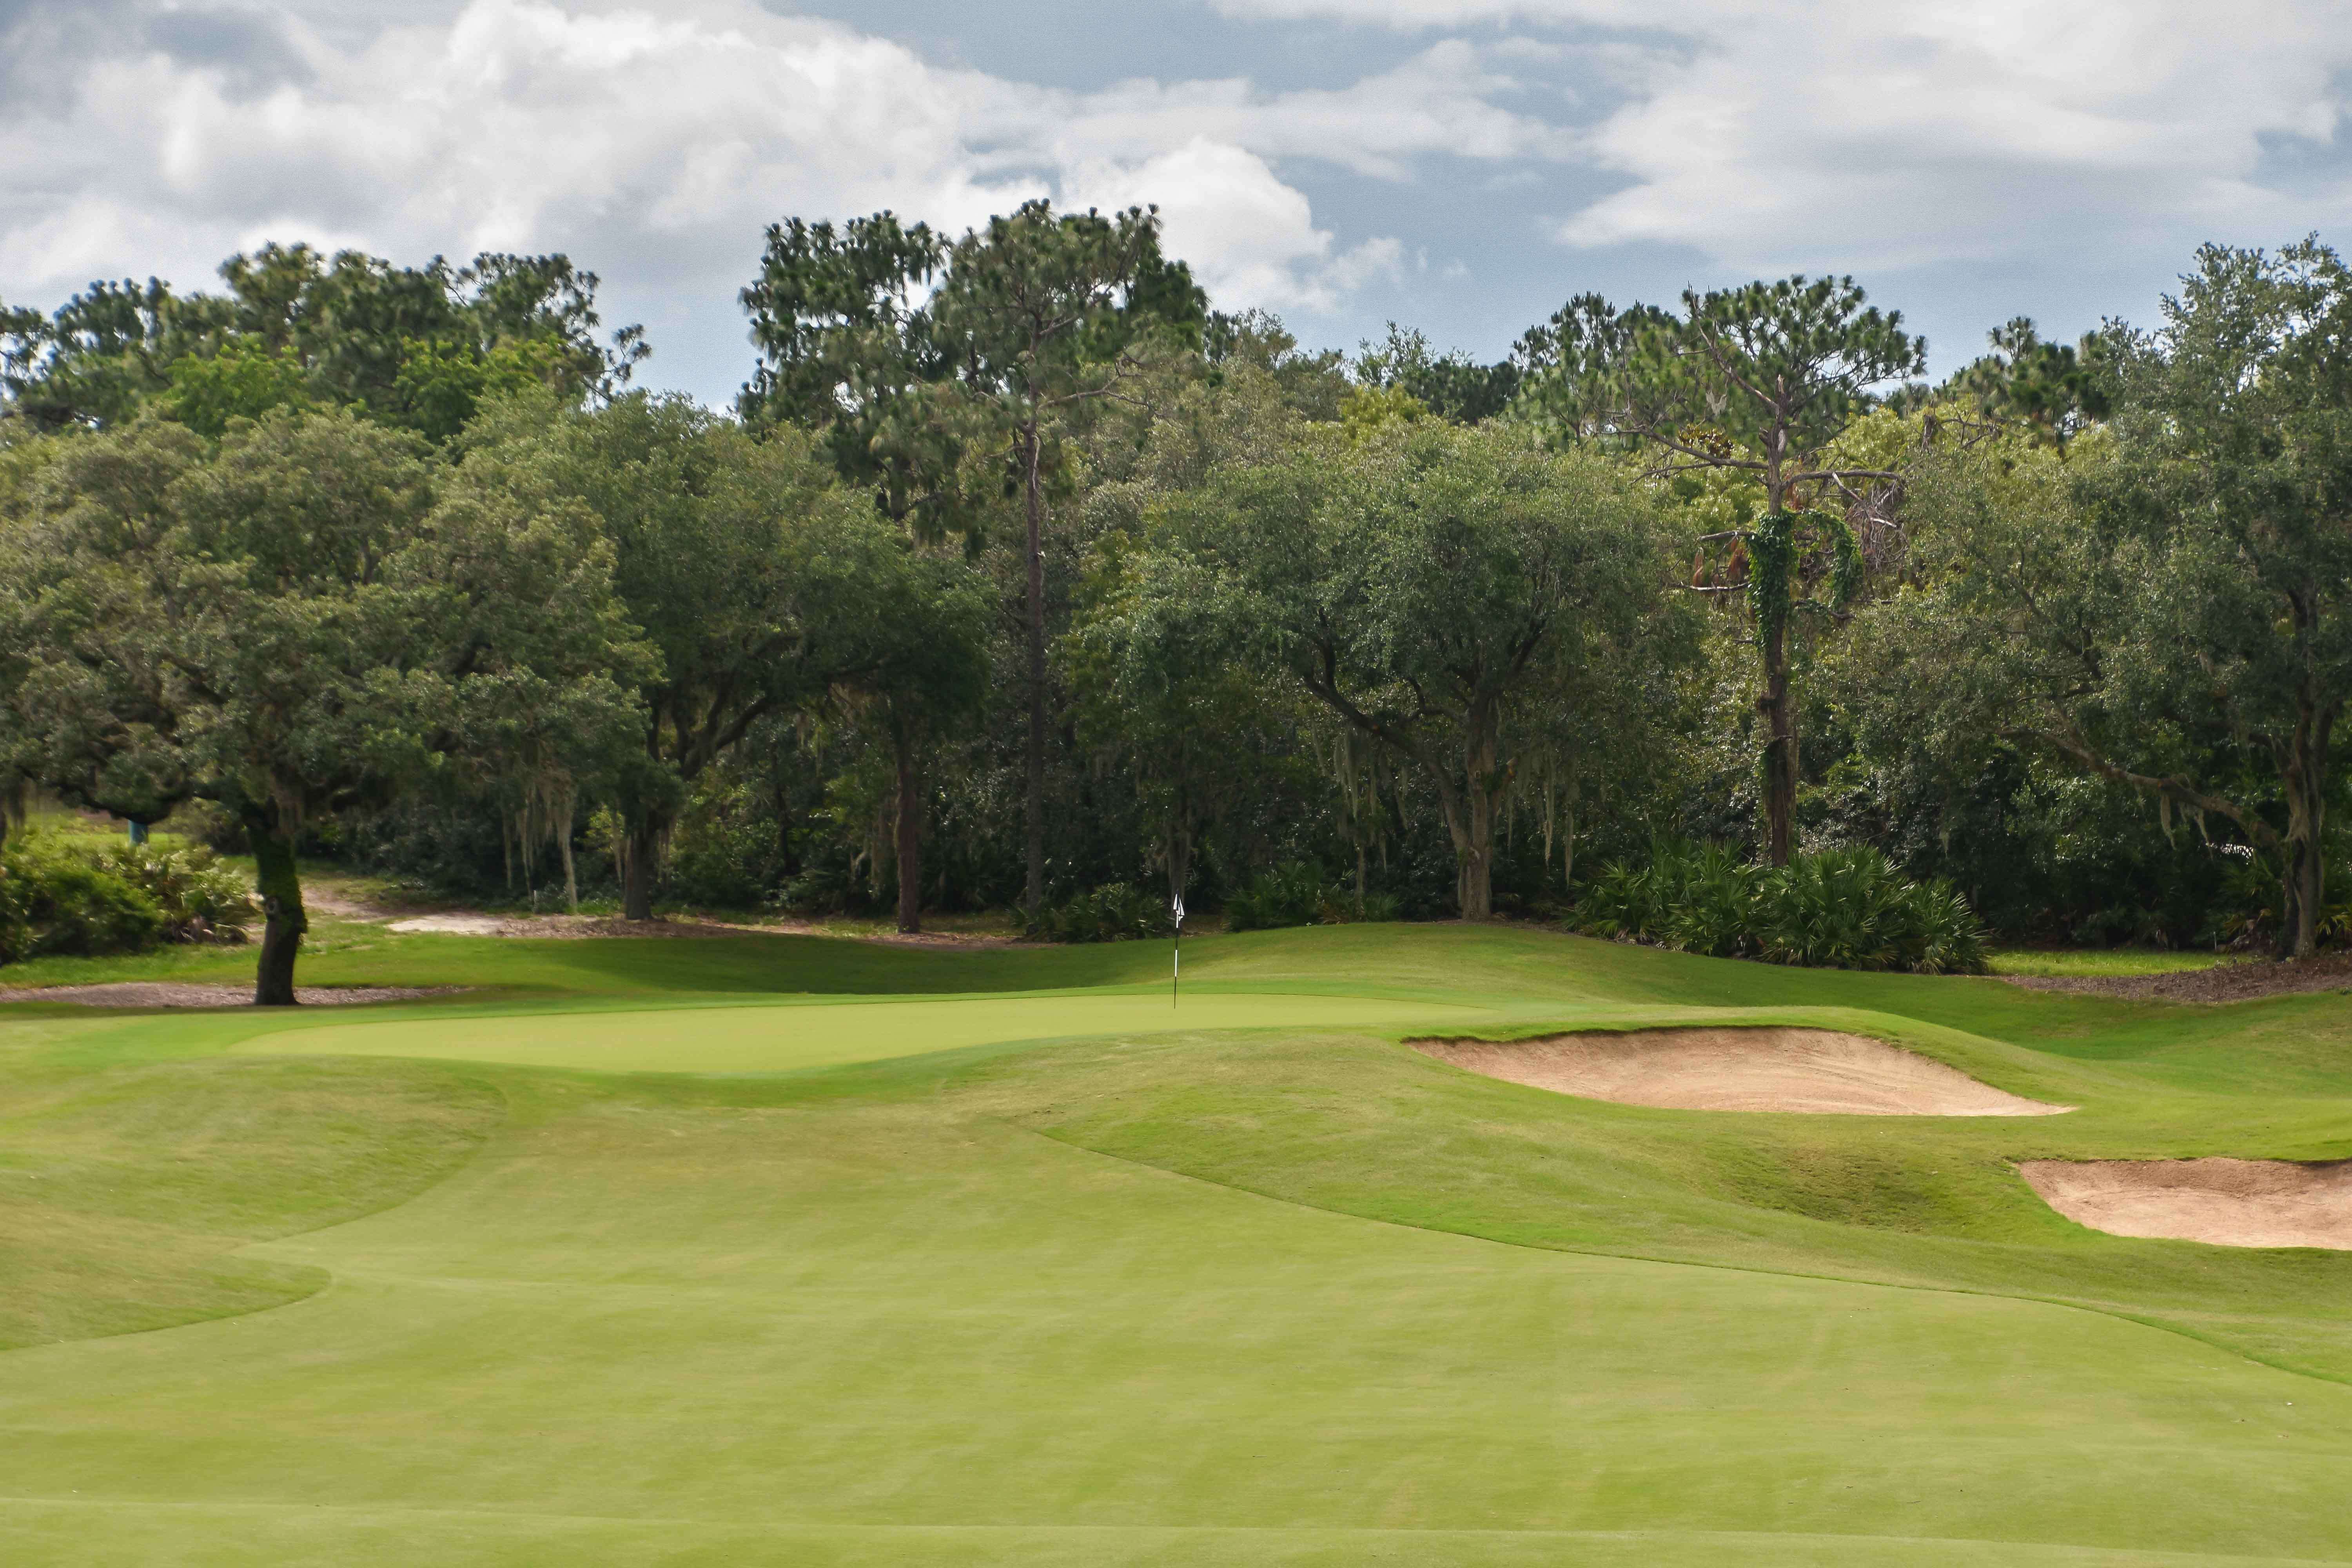 Black Diamond Ranch has the best golf courses in Florida